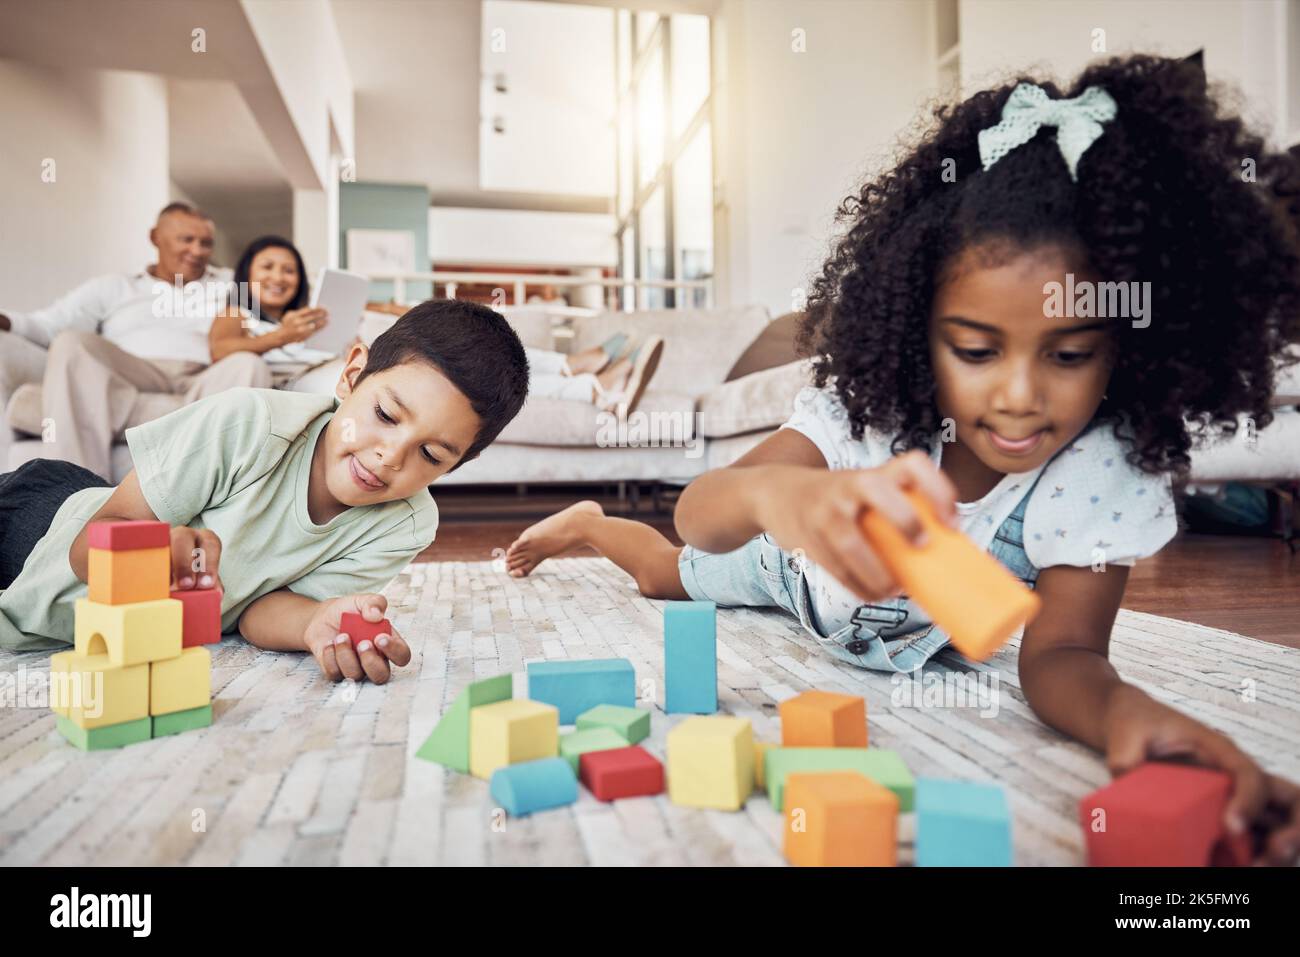 Kids, building blocks and creative learning in family home, living room floor and ground for growth, development and fun. Focus children, educational Stock Photo